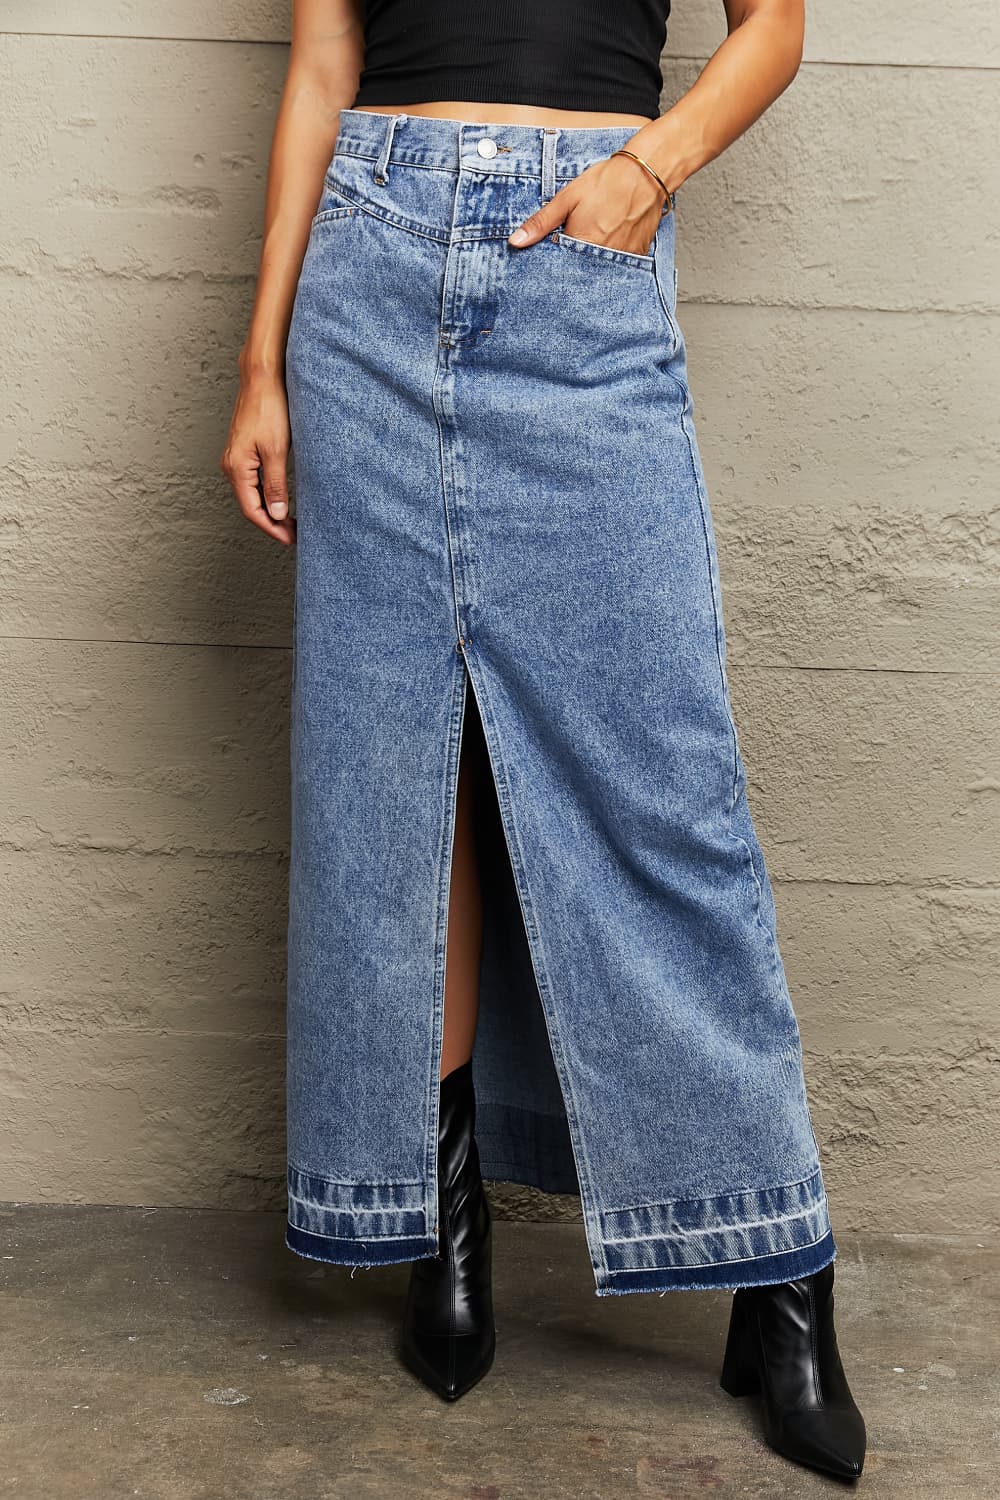 Front Slit Maxi Denim Skirt - Skirt - Wild Willows Boutique - Massapequa, NY, affordable and fashionable clothing for women of all ages. Bottoms, tops, dresses, intimates, outerwear, sweater, shoes, accessories, jewelry, active wear, and more // Wild Willow Boutique.